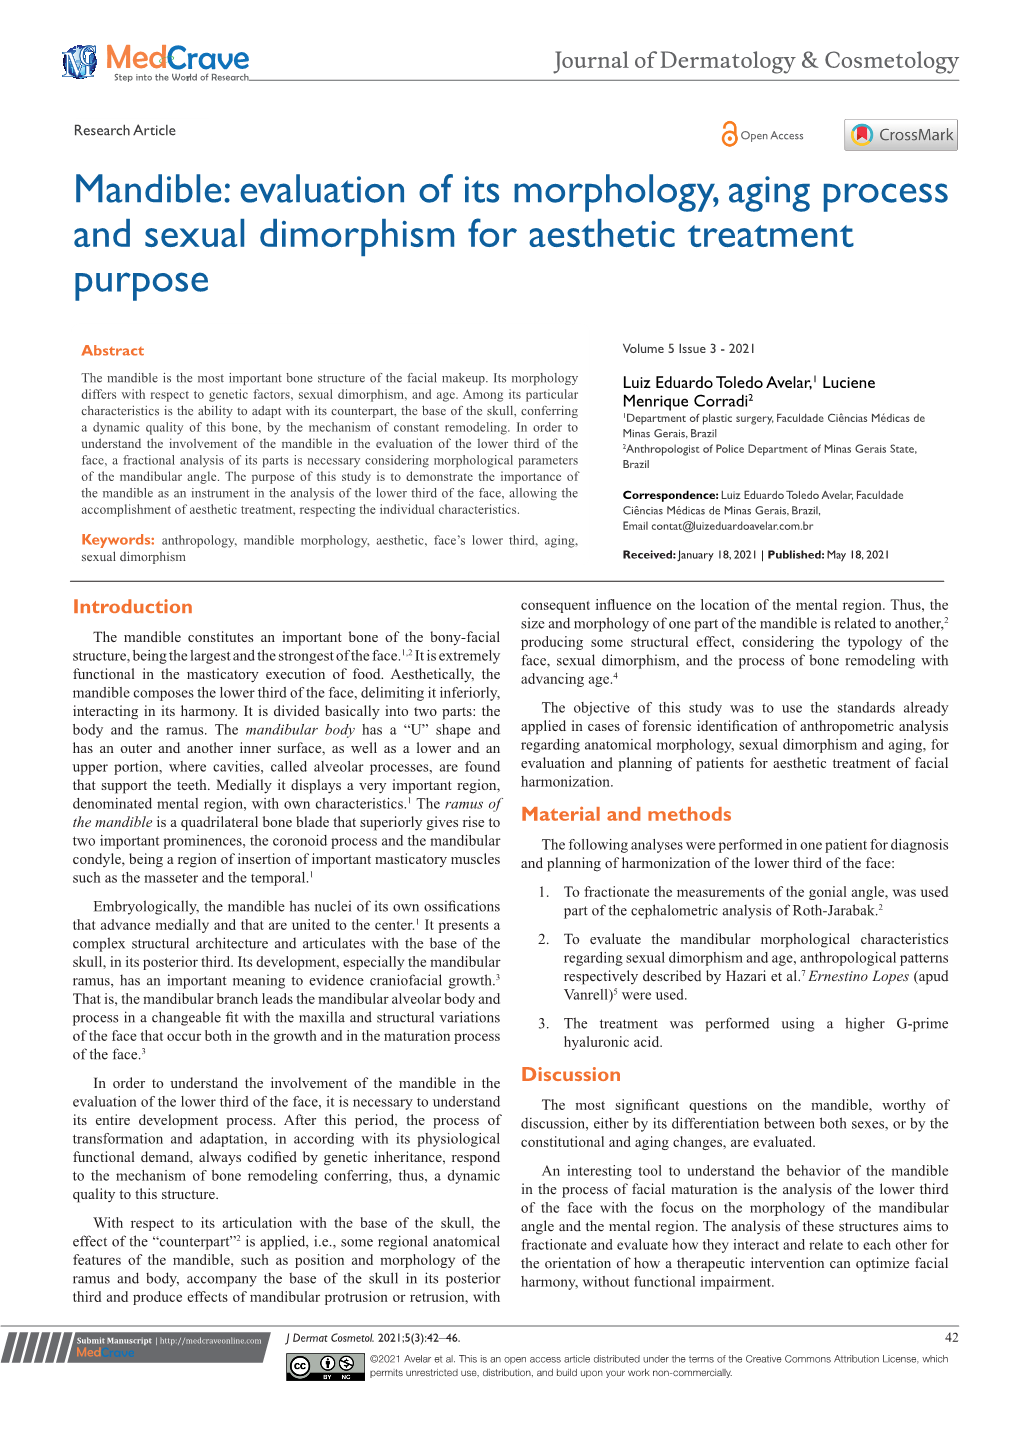 Evaluation of Its Morphology, Aging Process and Sexual Dimorphism for Aesthetic Treatment Purpose